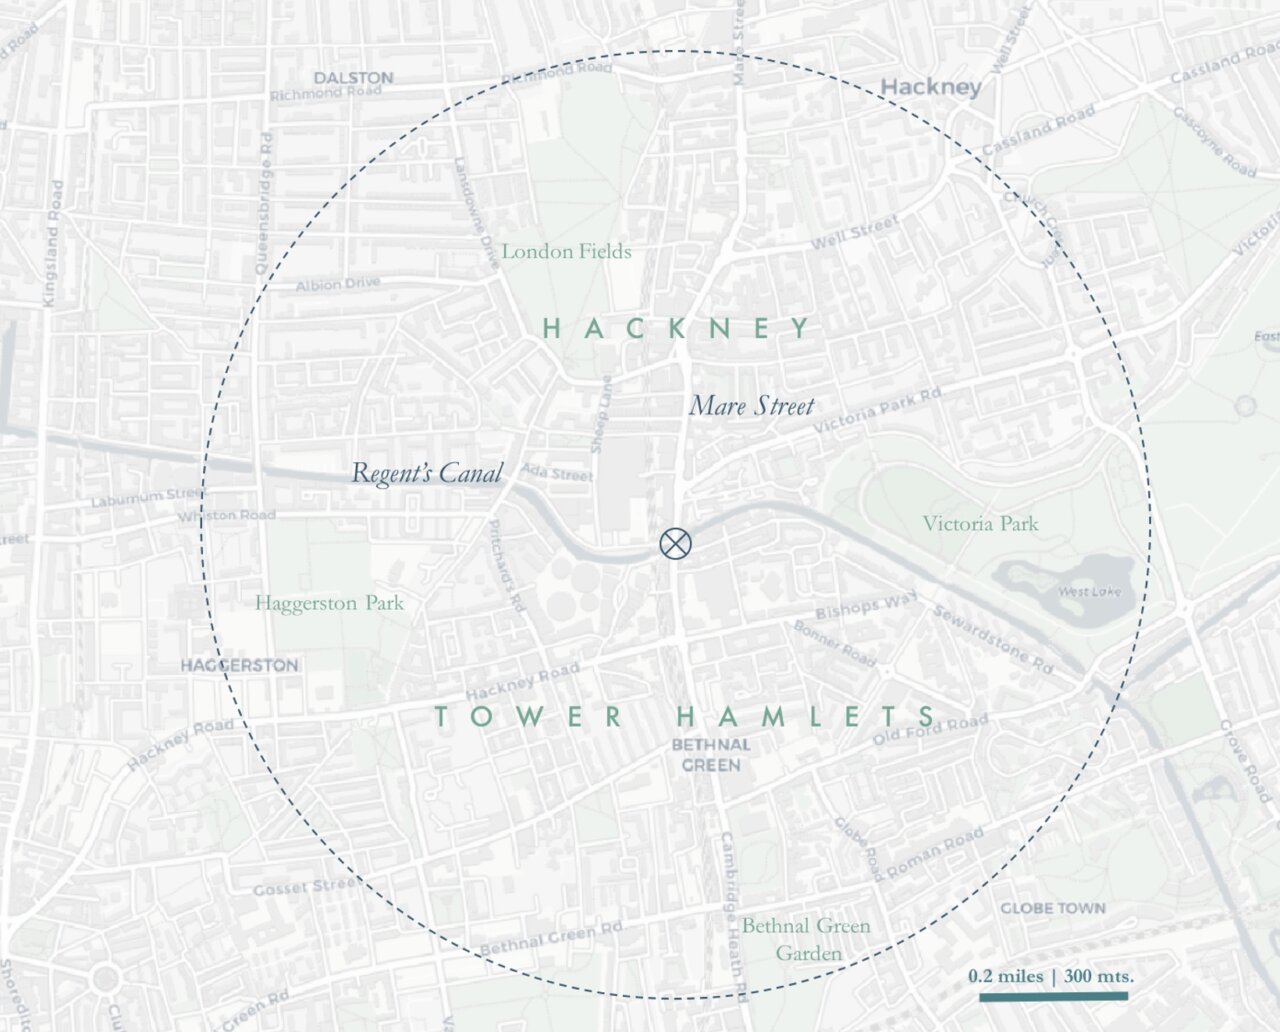 Case study report: The Maker-Mile in East London